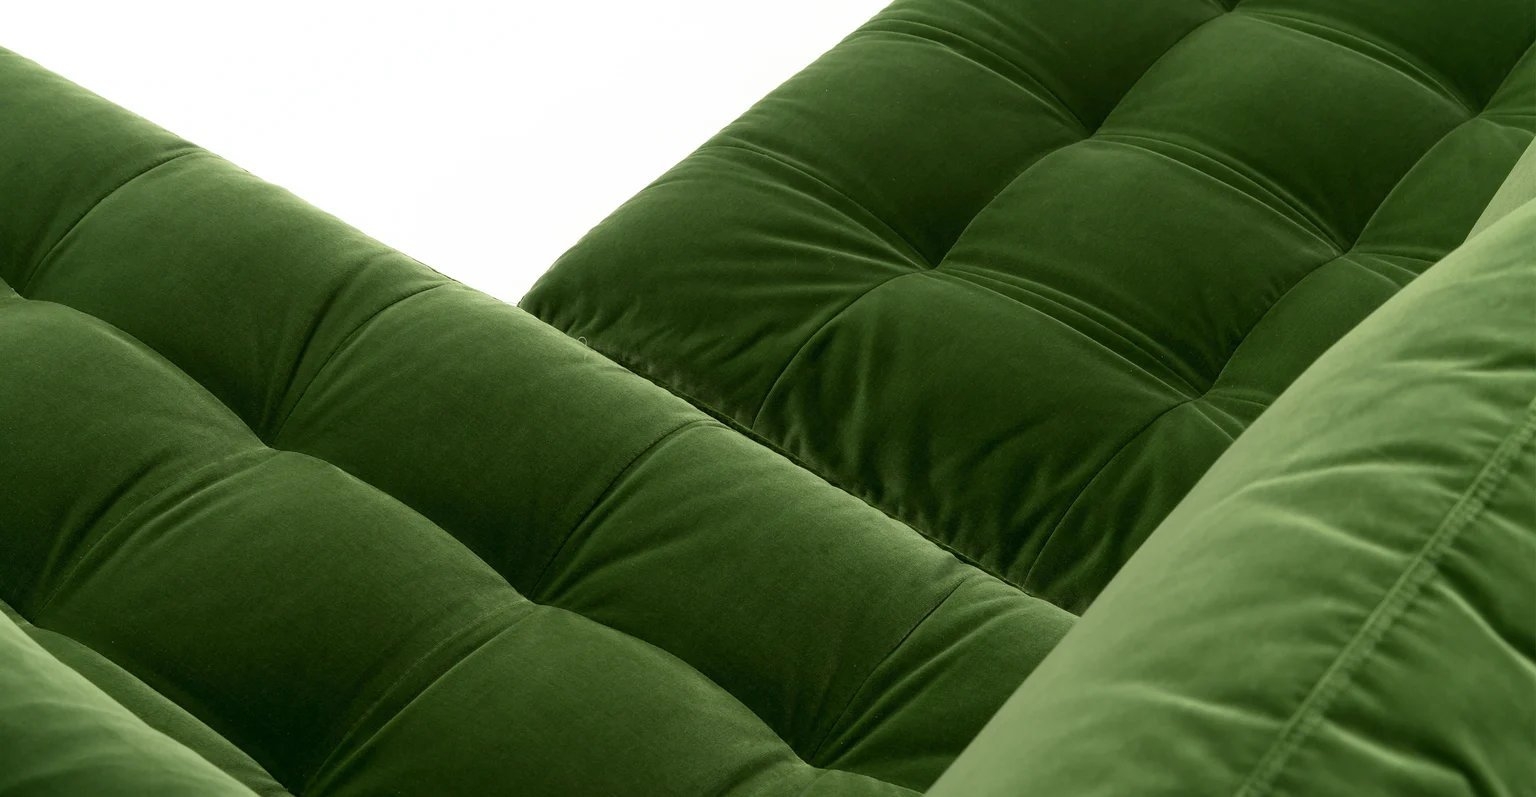 Sven Grass Green Right Sectional Sofa - Image 6